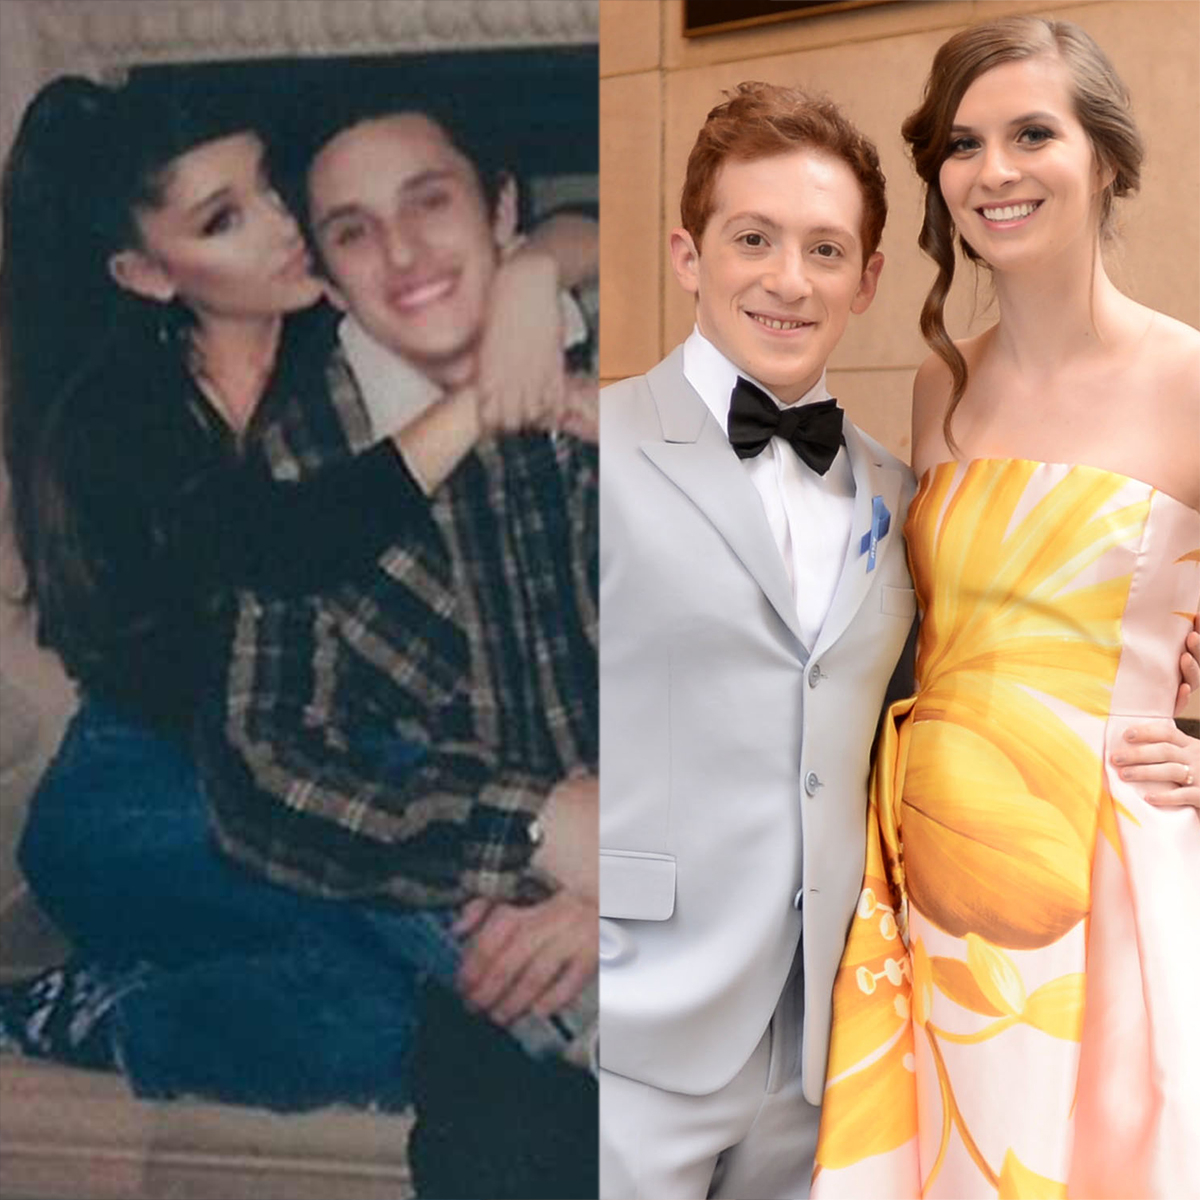 Where Ariana Grande & Ethan Slater’s Marriages Stood Before Romance